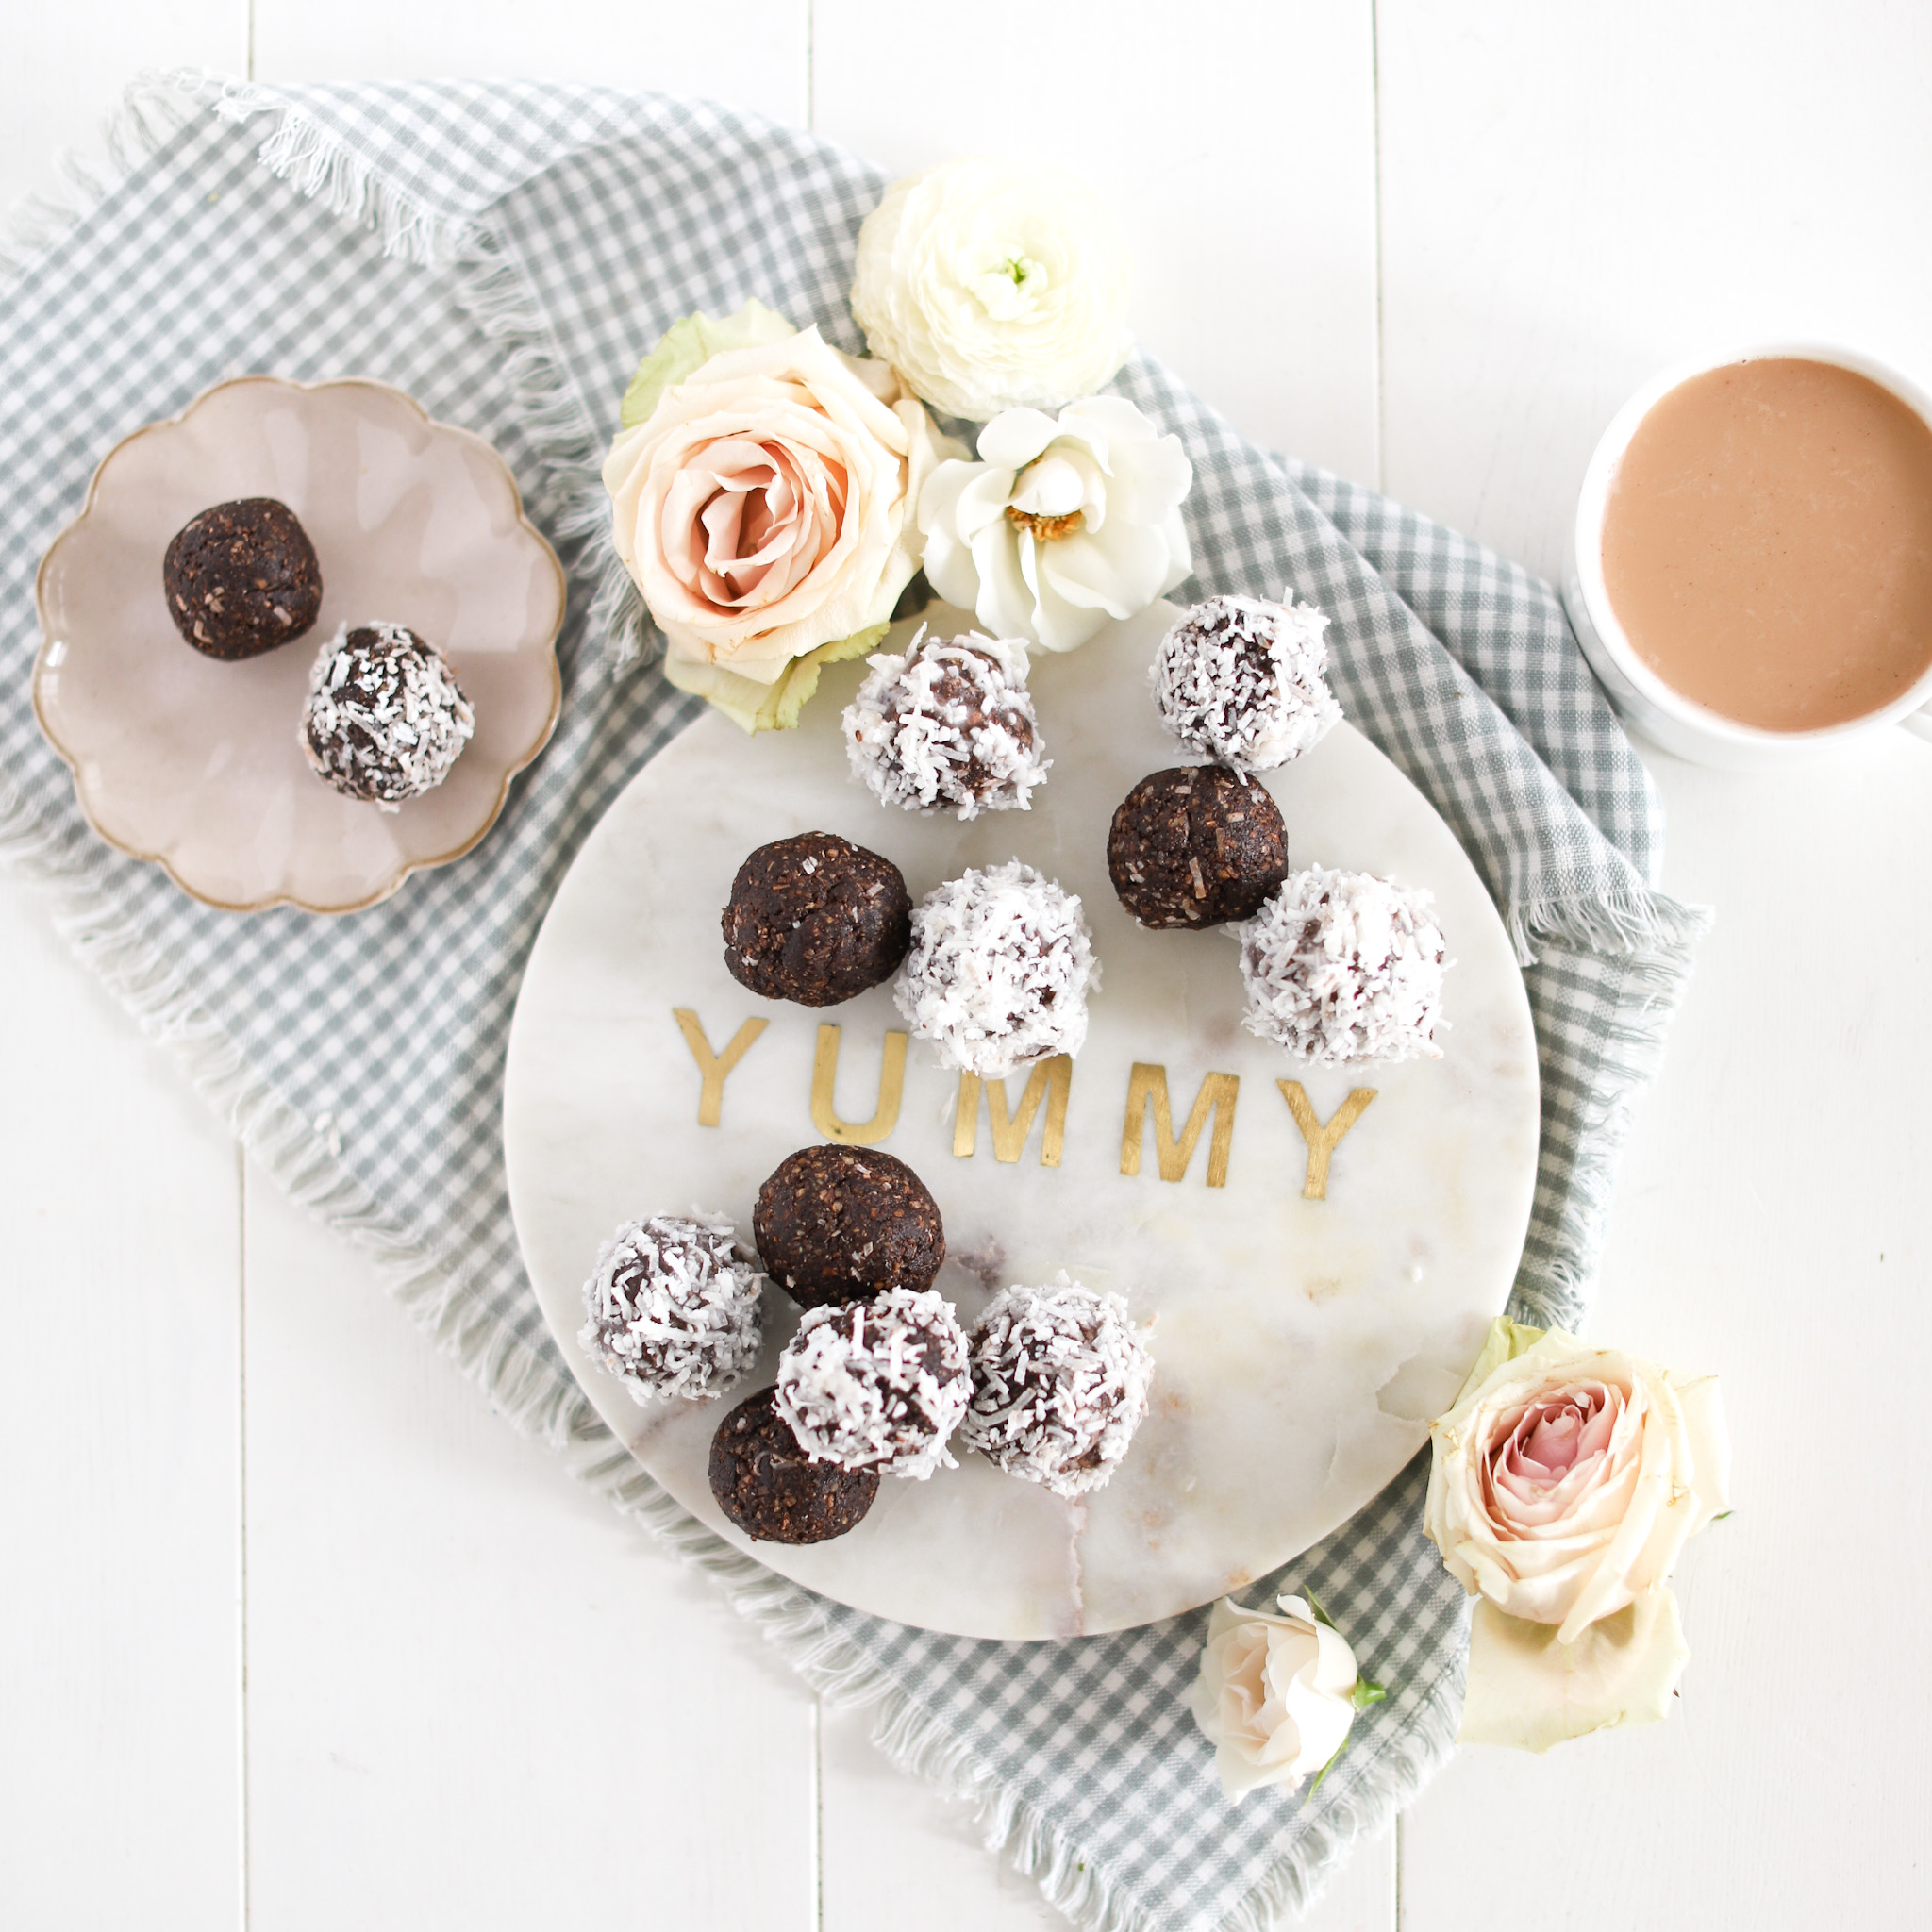 almond joy energy balls on a tray with cup of tea and flowers